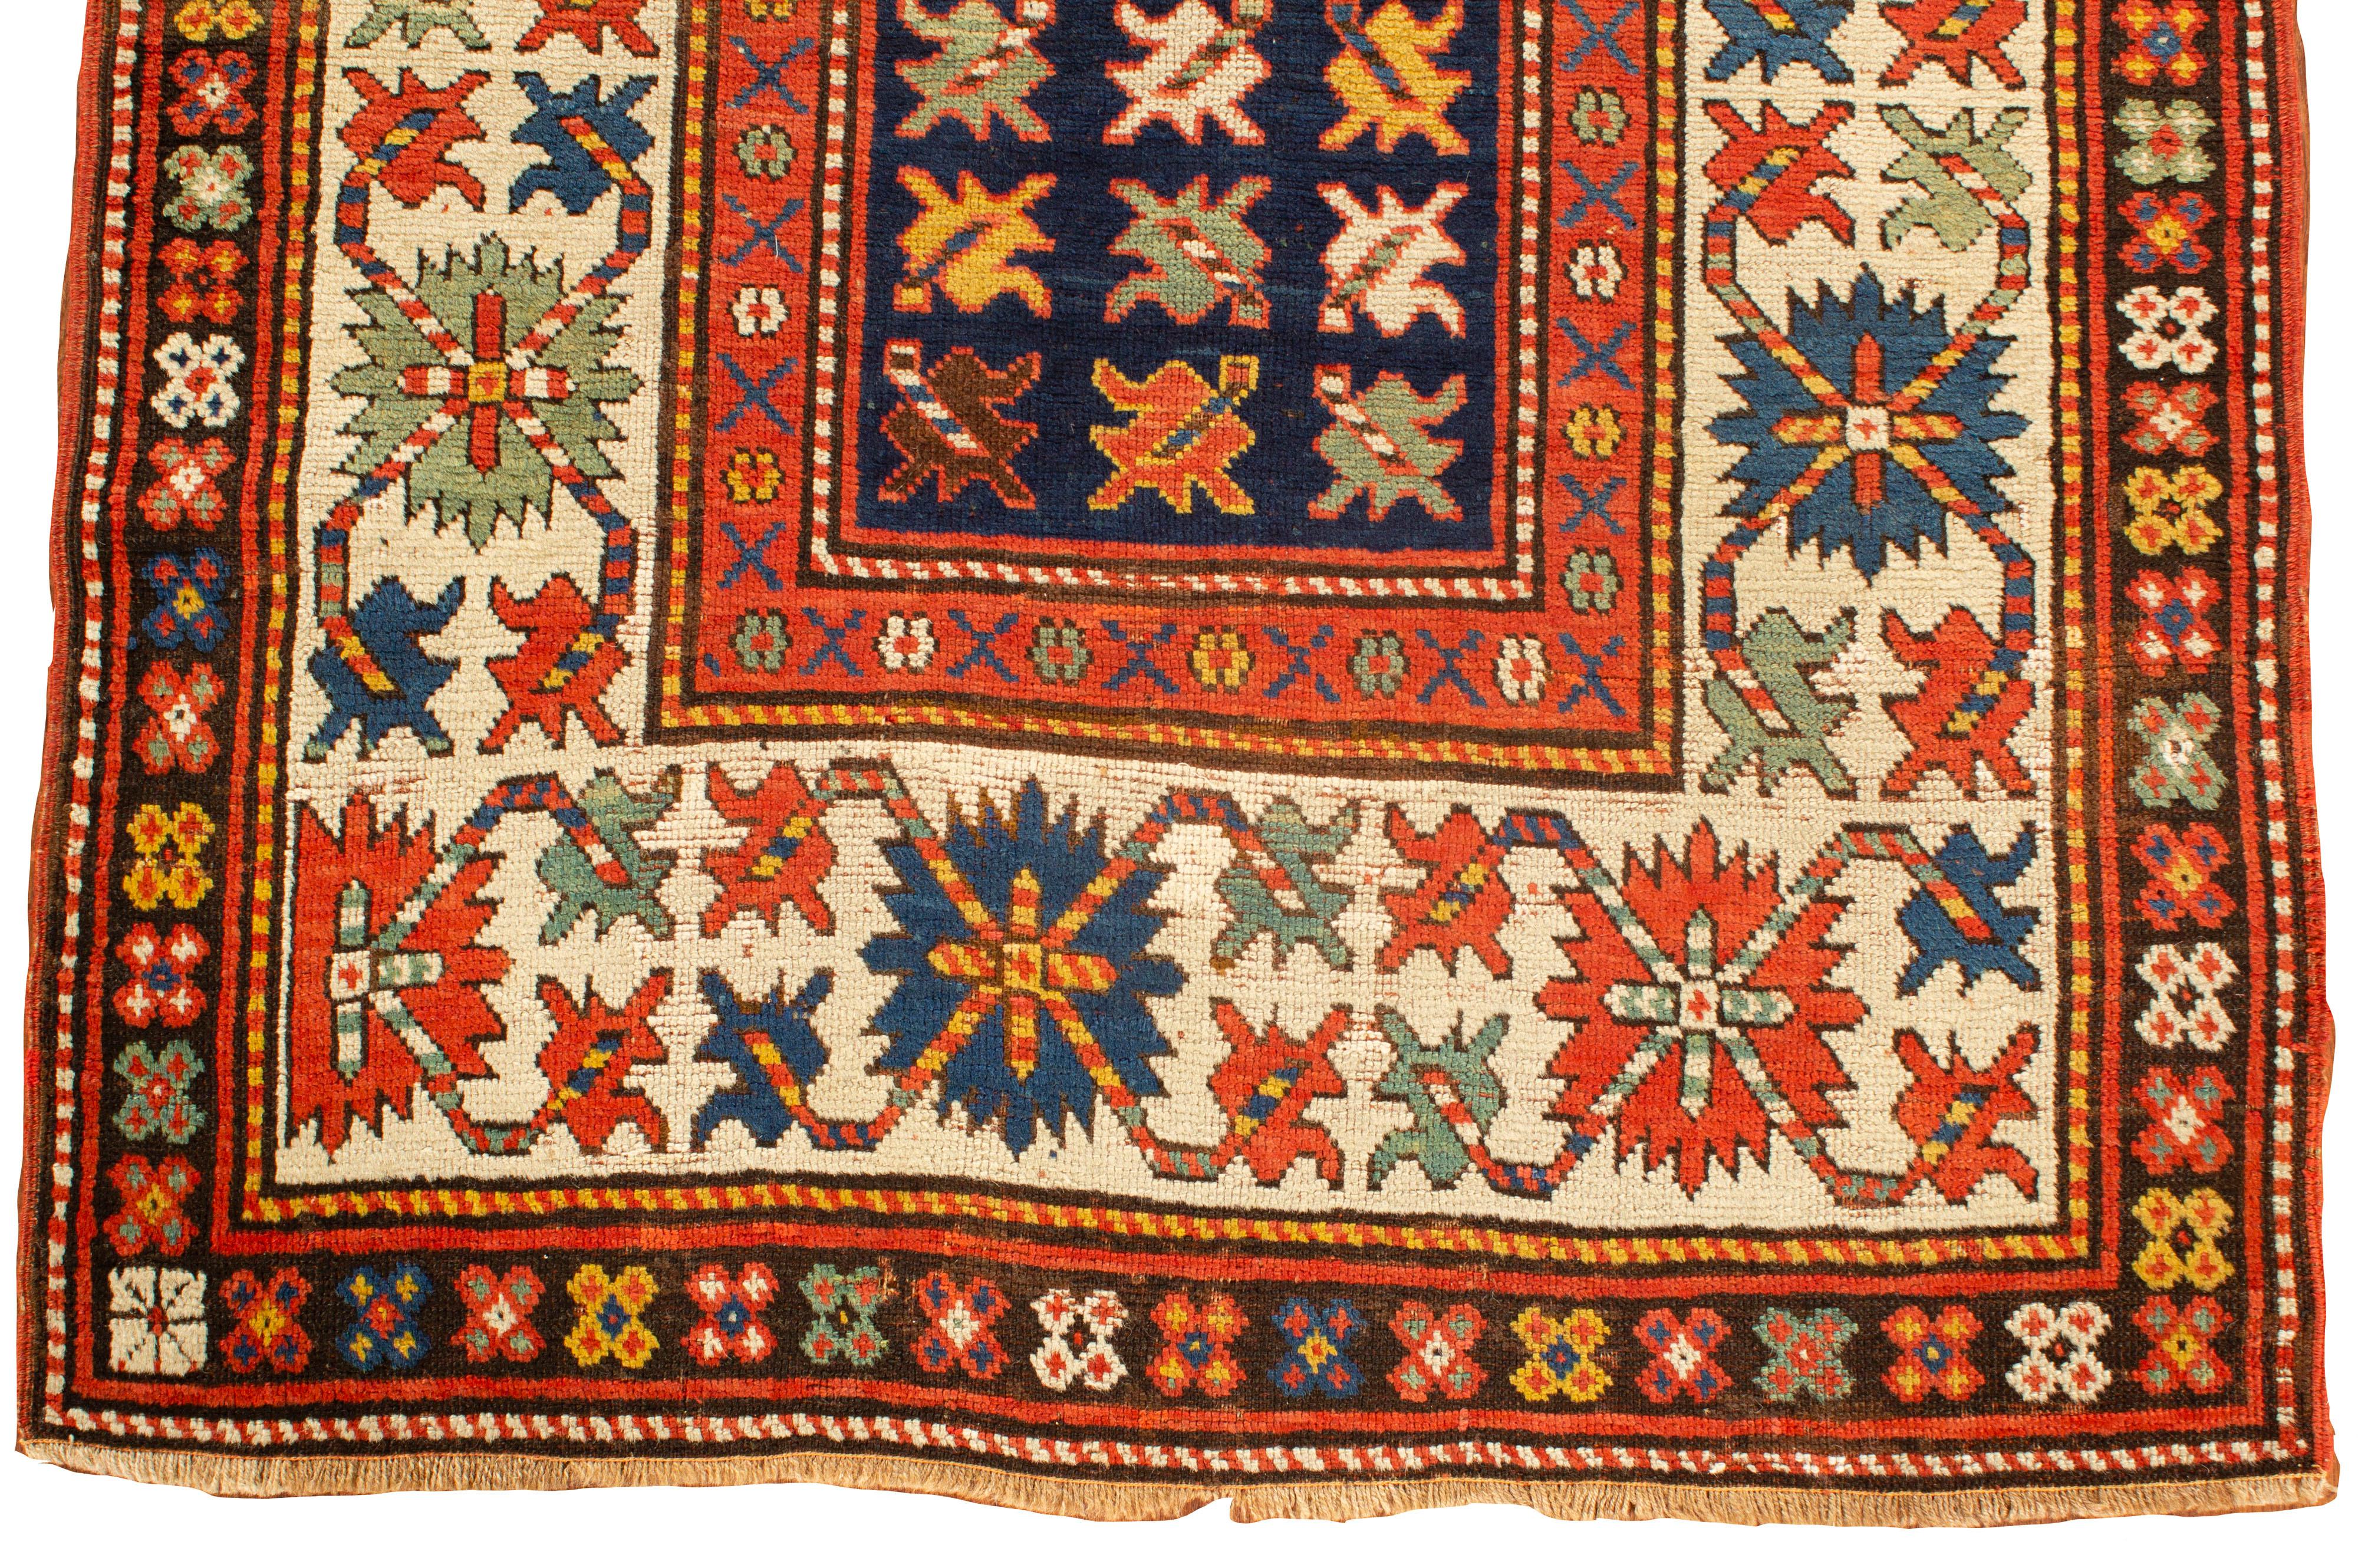 Antique North West Caucasian rug circa 1880, The Caucasus Mountains, between Persia and Russia are justly famous for their colorful, geometric antique scatter rugs and this is a fine example. Size: 3'5 x 7'7.